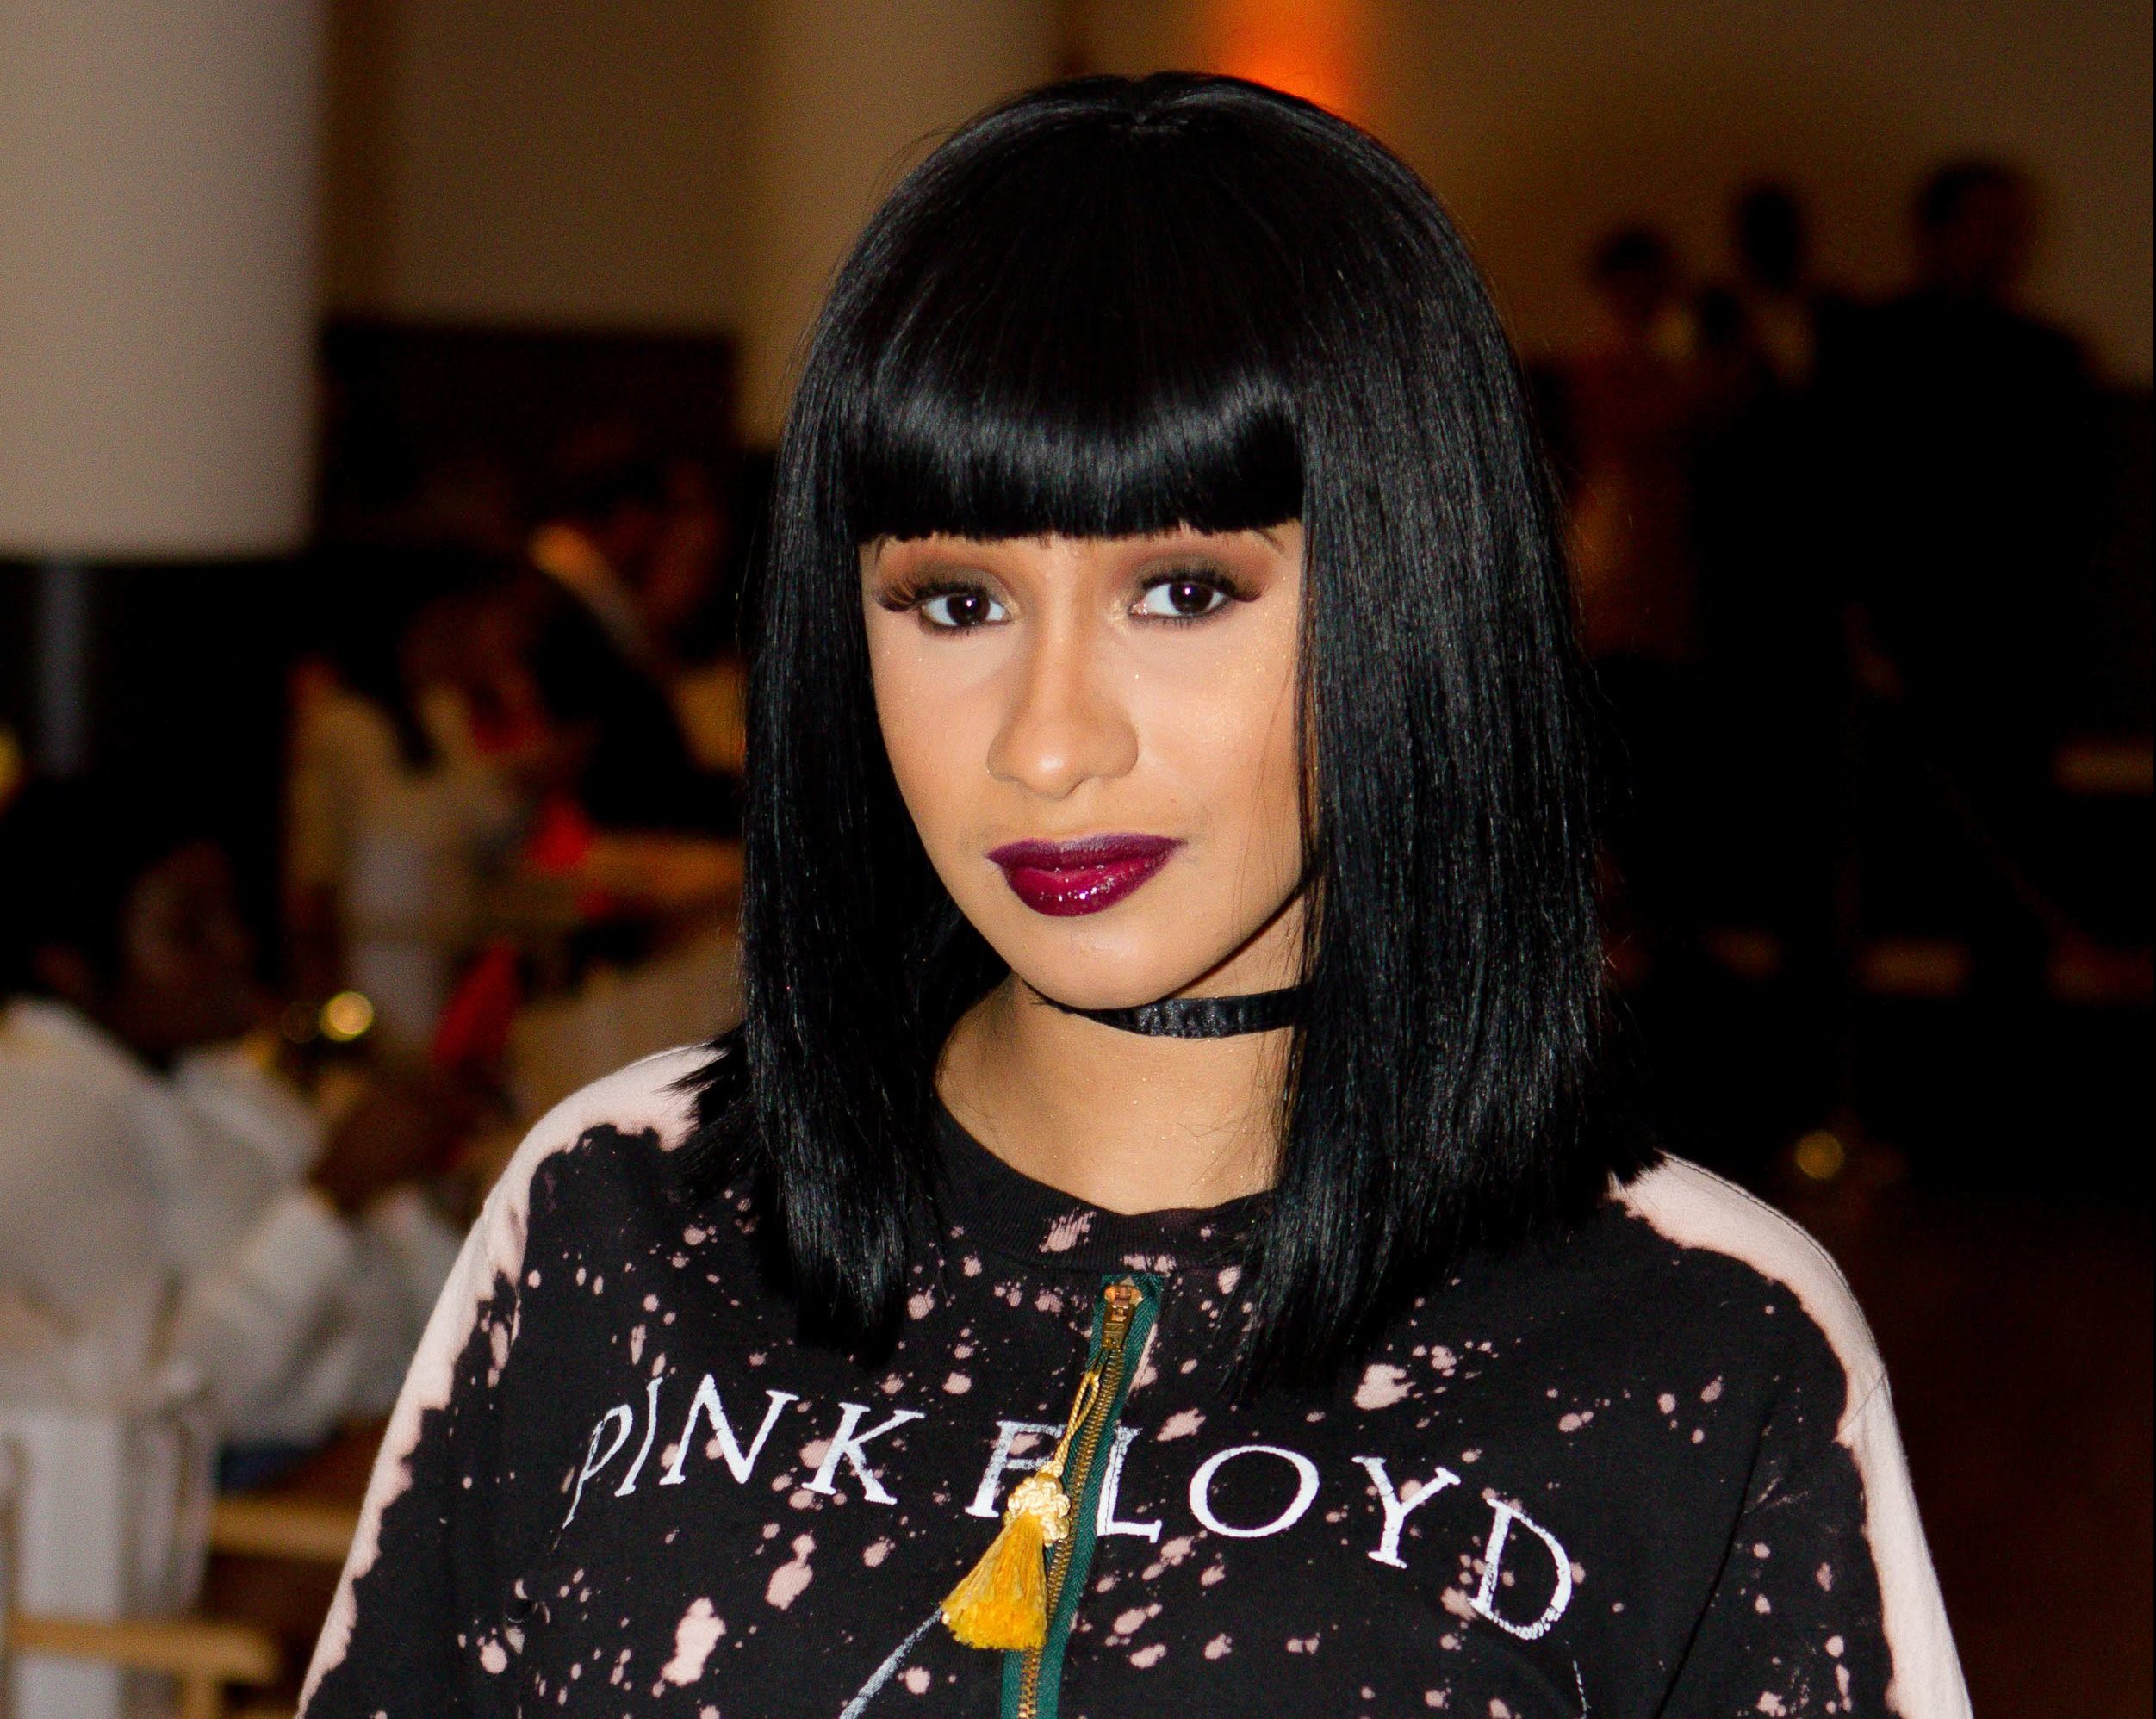 Run My Refund: Cardi B Cancels Doll Line After Production Issues